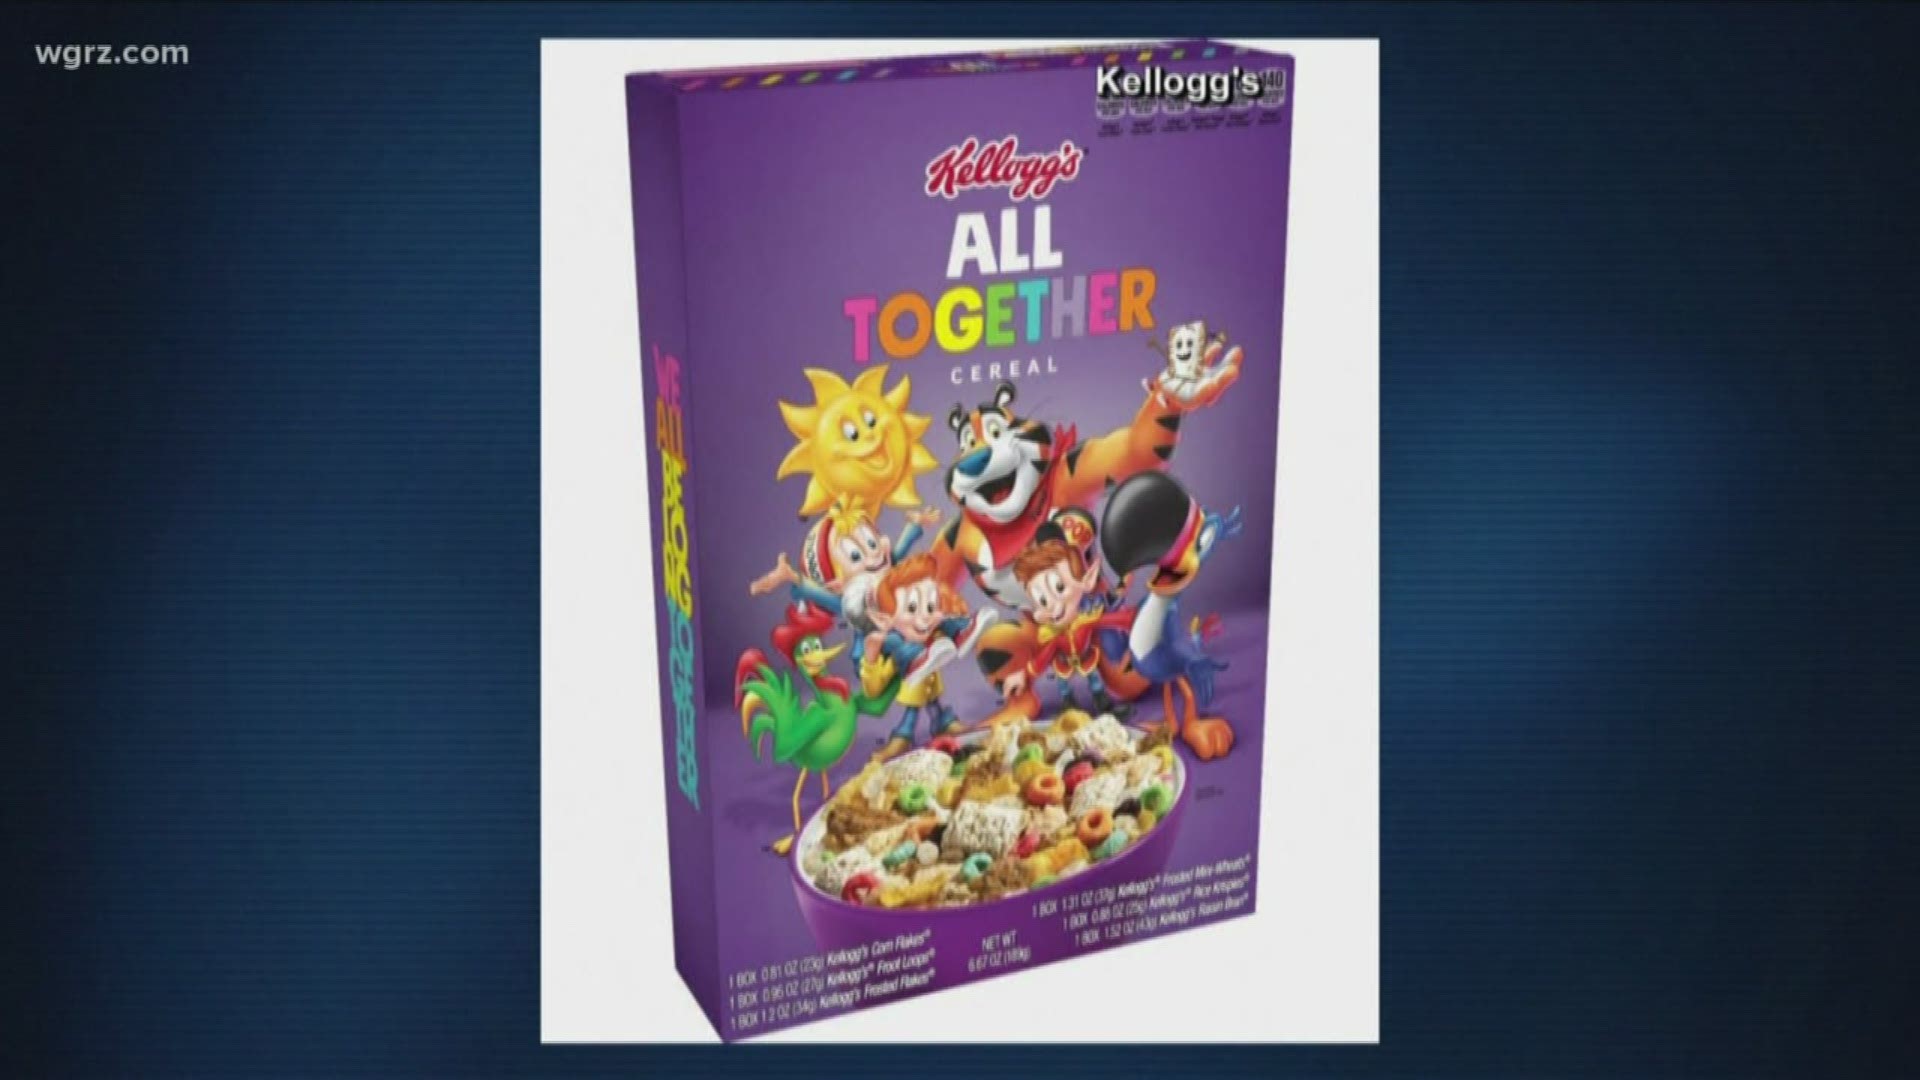 Kellogg's 'All Together' cereal pack